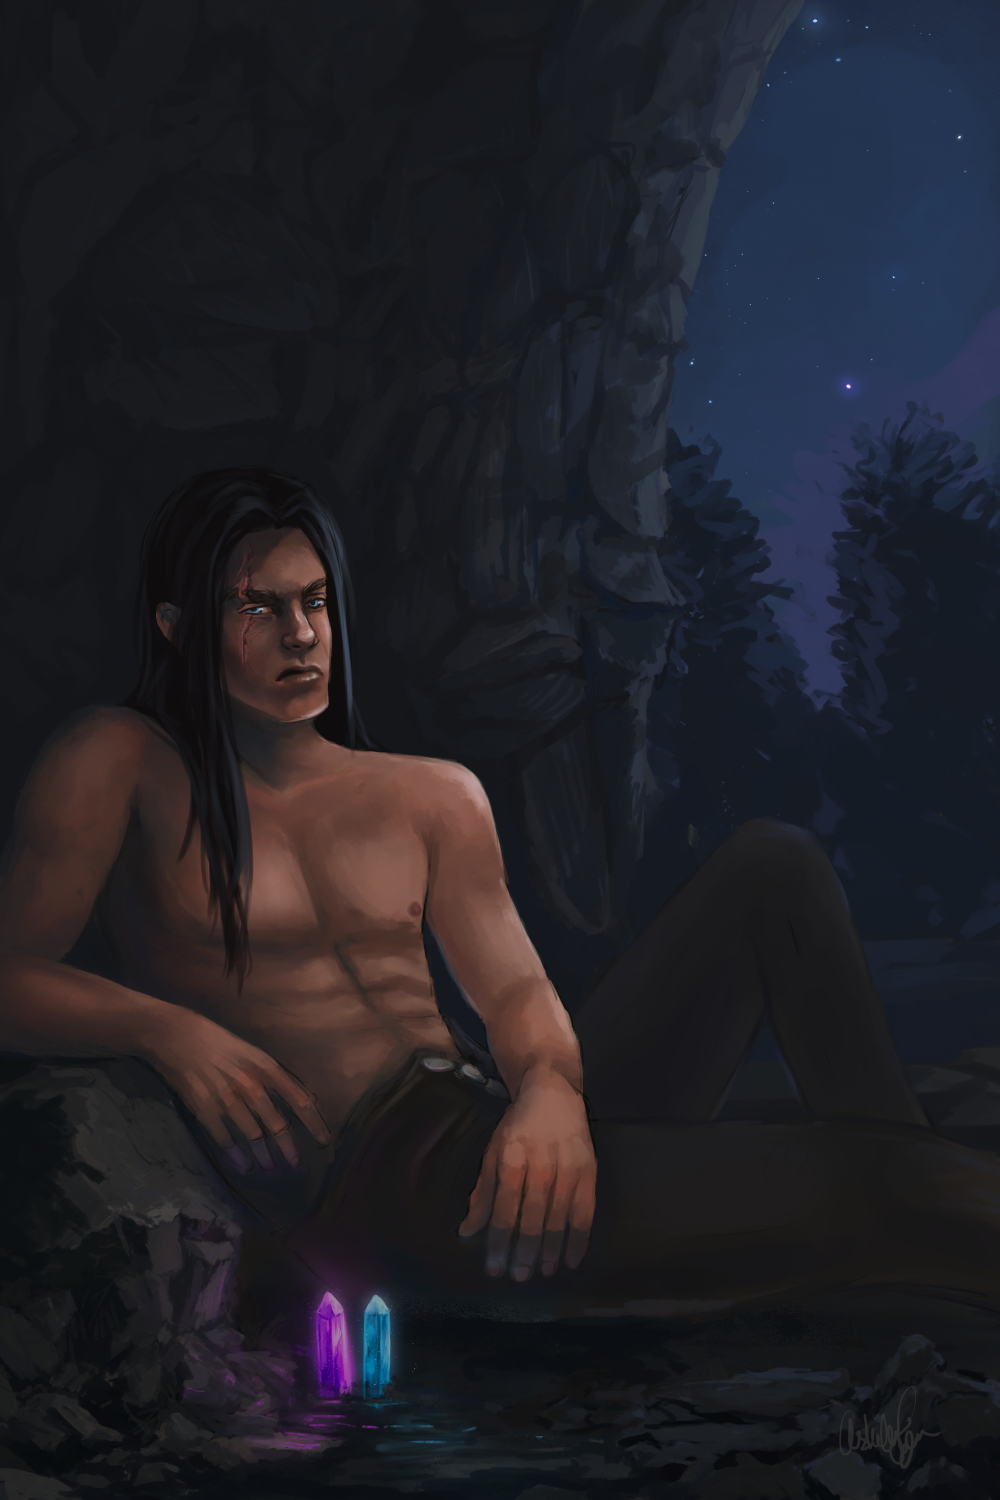 Digital painting of an angry, shirtless man in a cave. There's a scar going down the right side of his face.